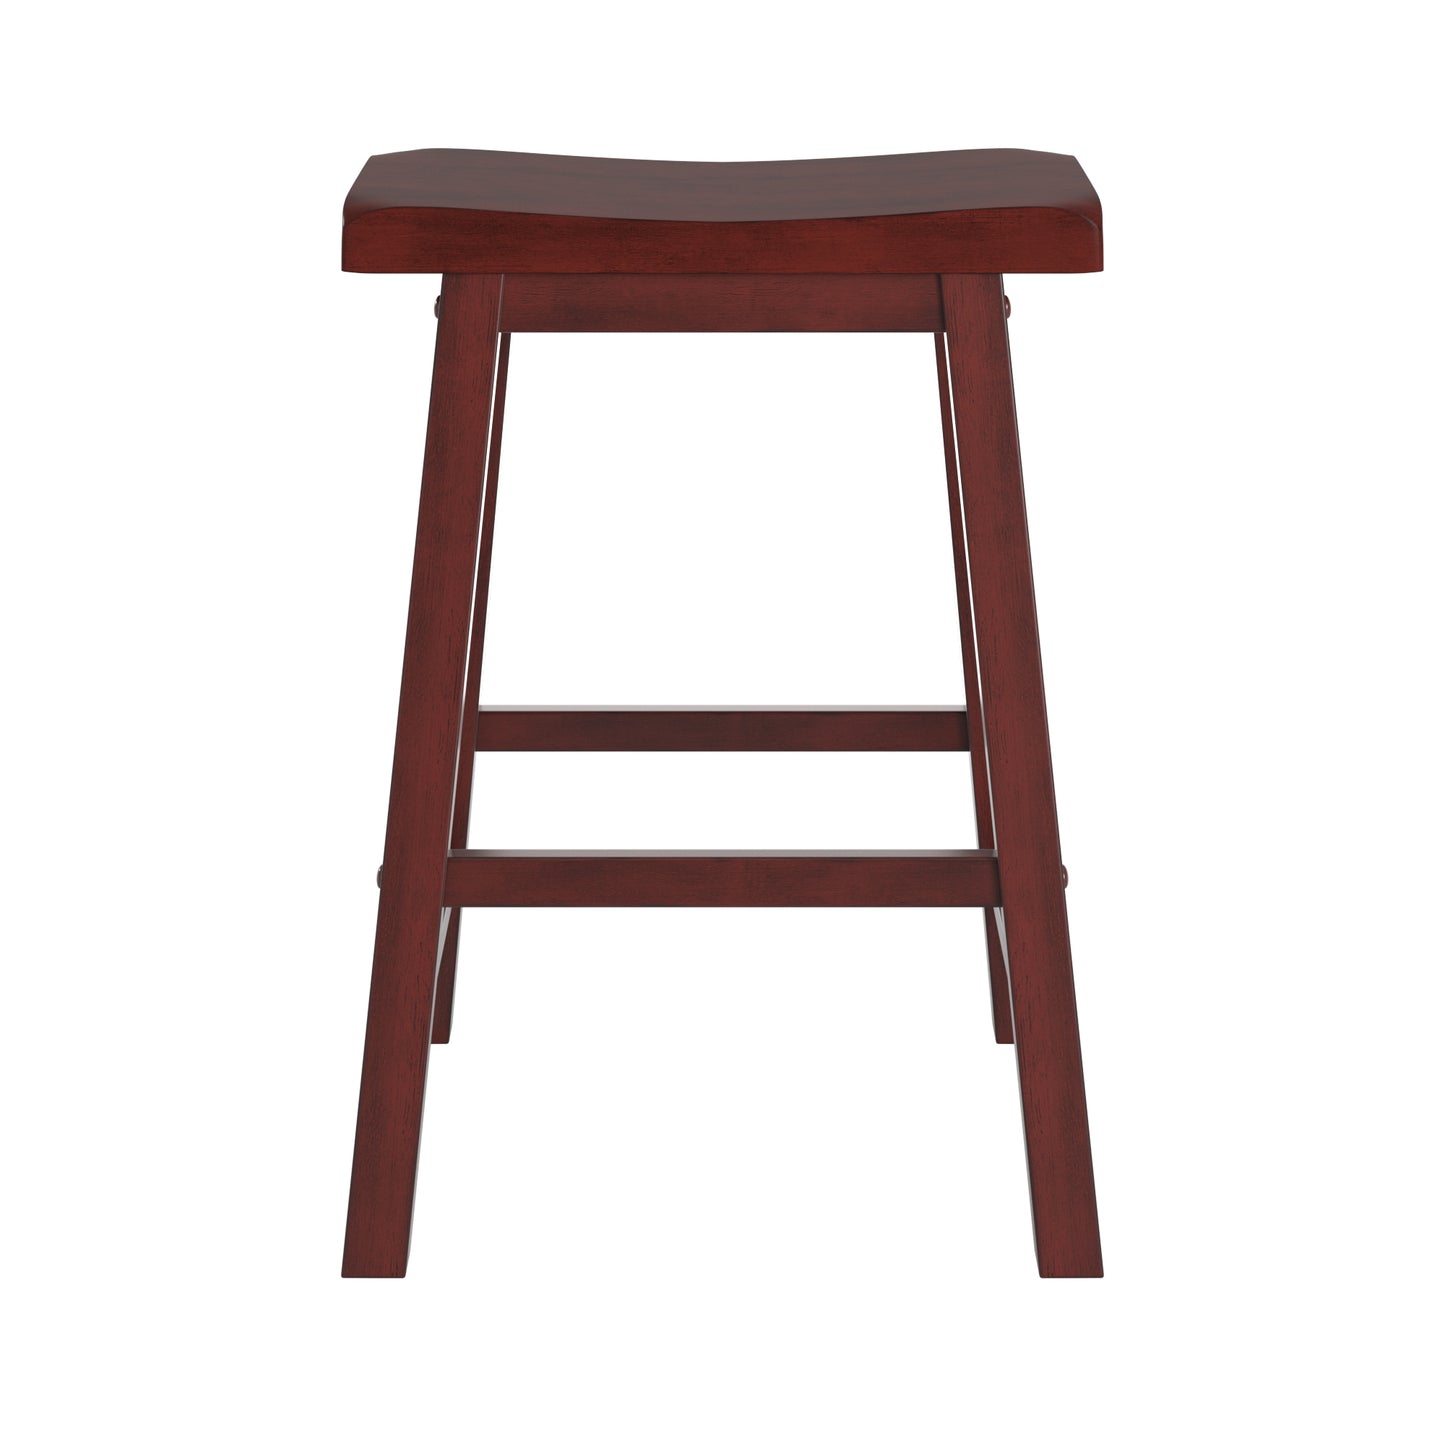 Saddle Seat 24" Counter Height Backless Stools (Set of 2) - Antique Berry Finish